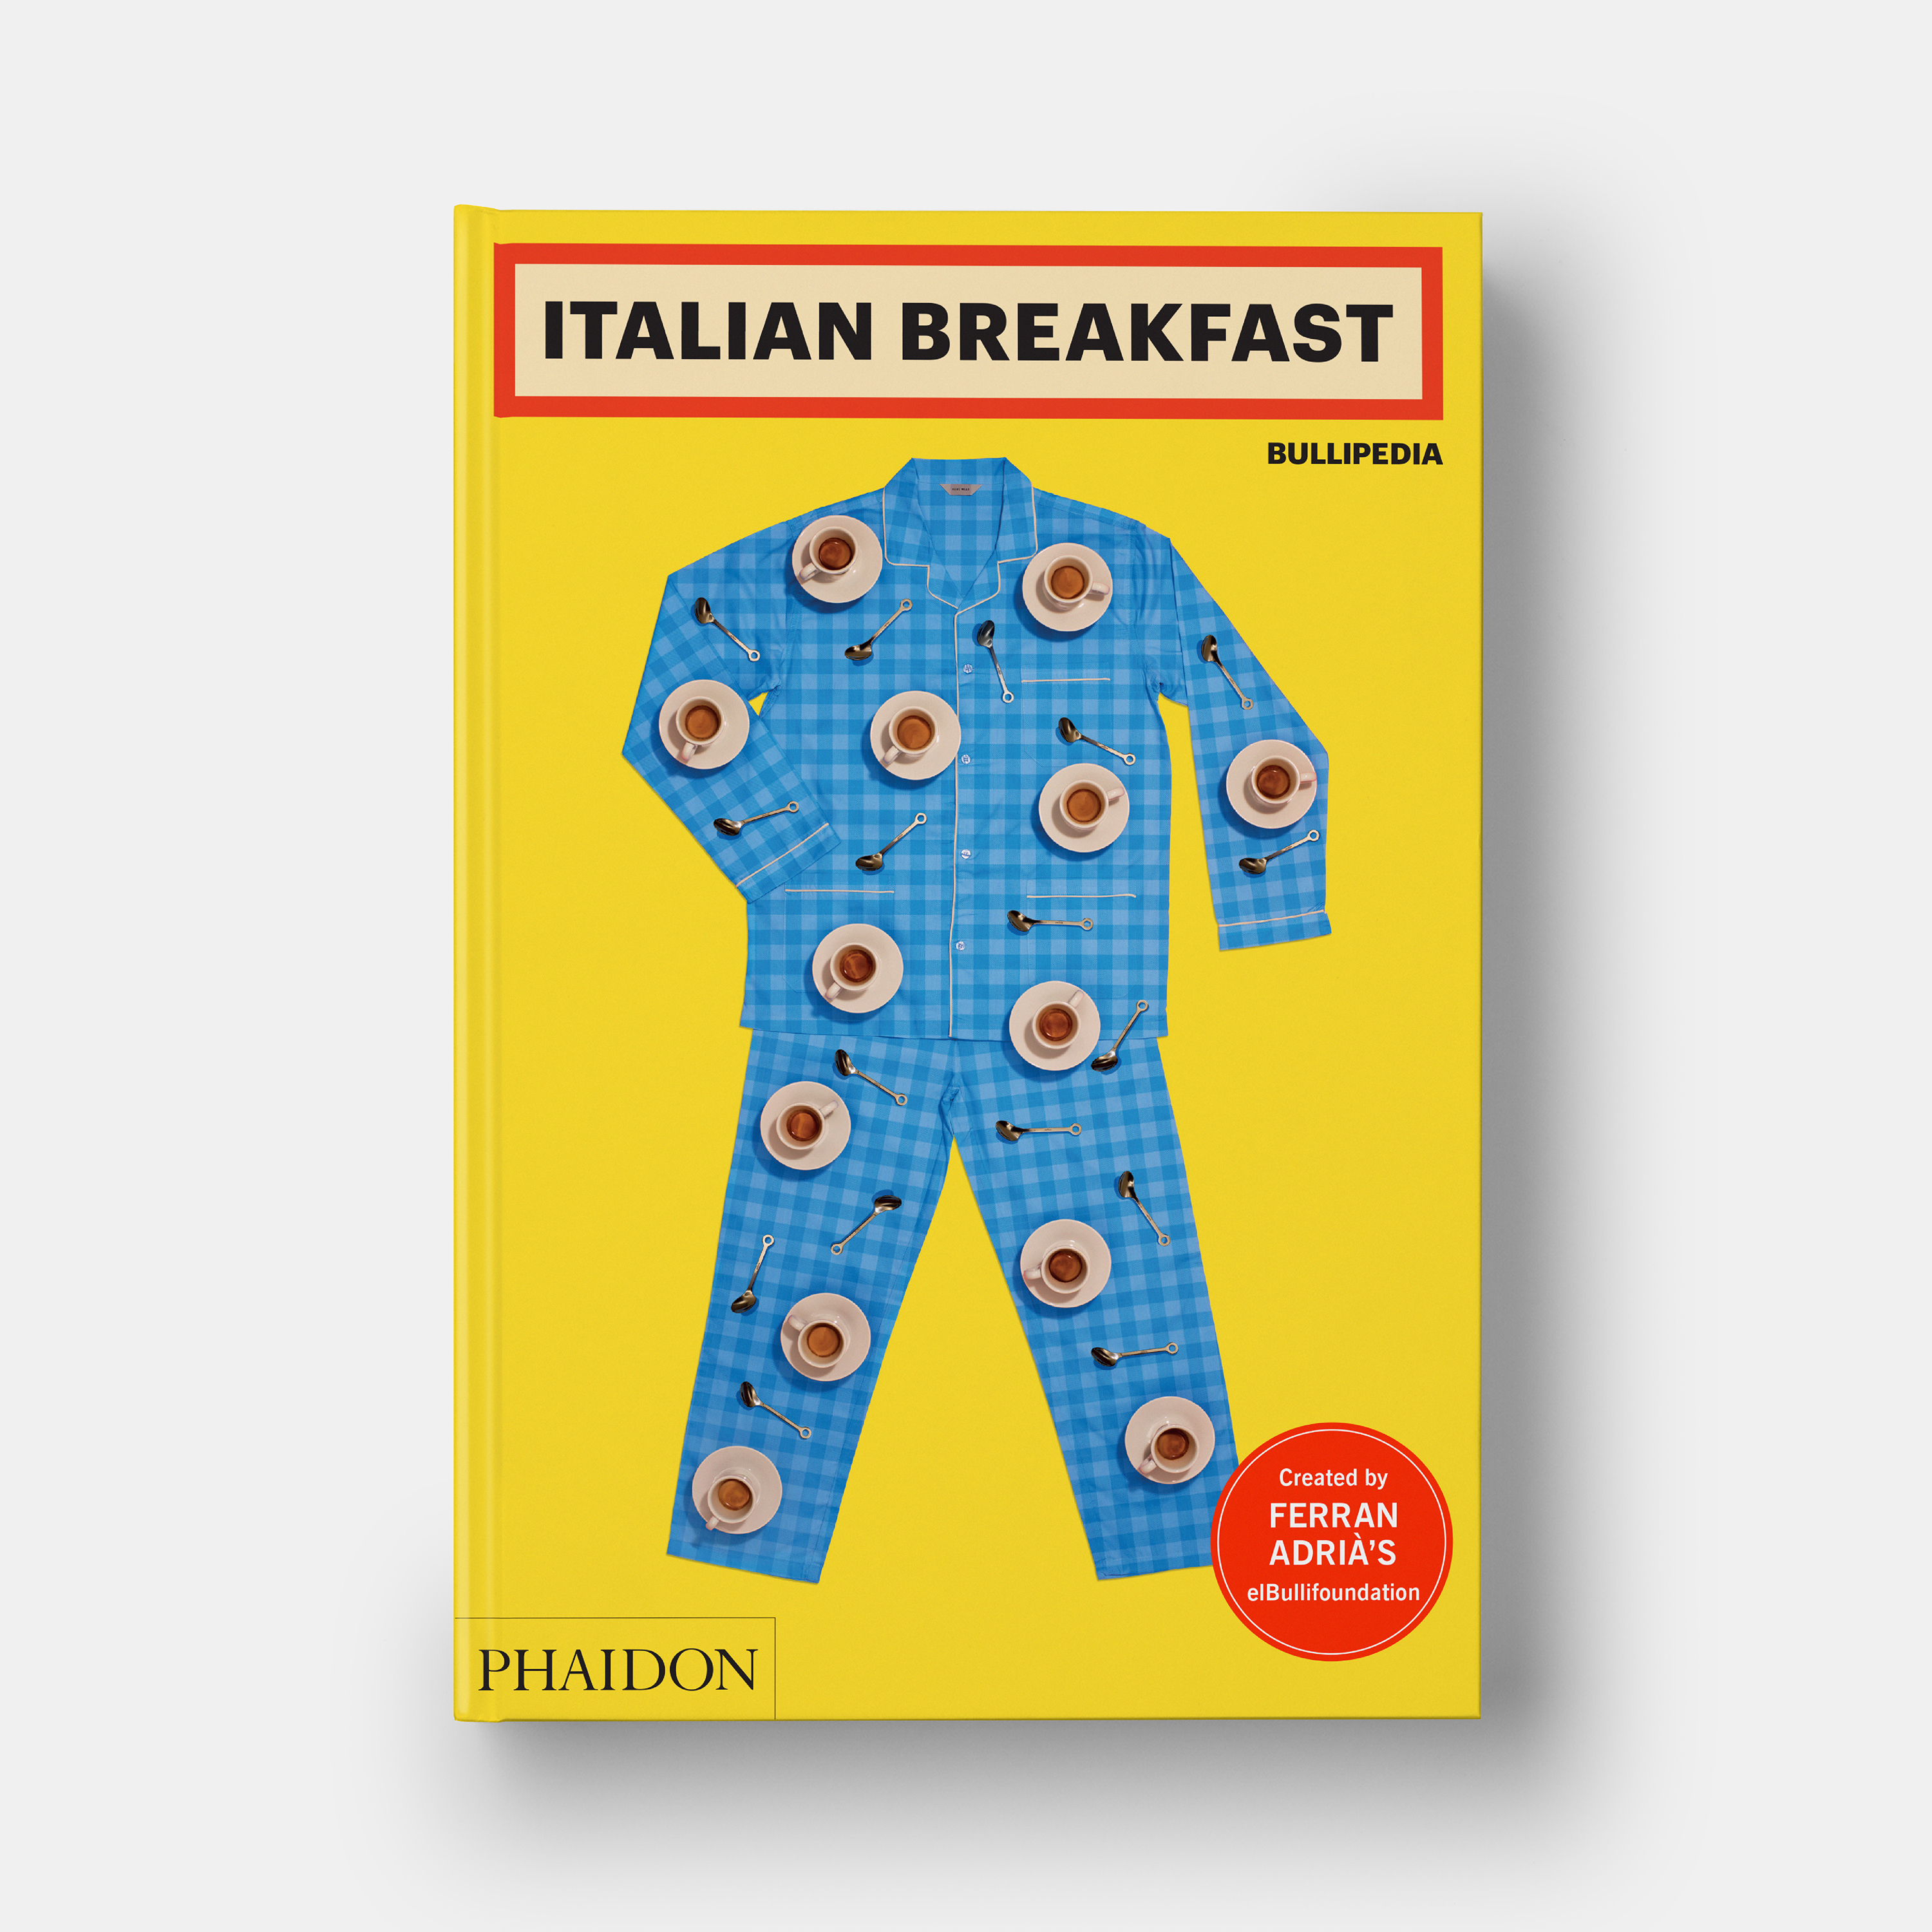 All you need to know about Italian Breakfast